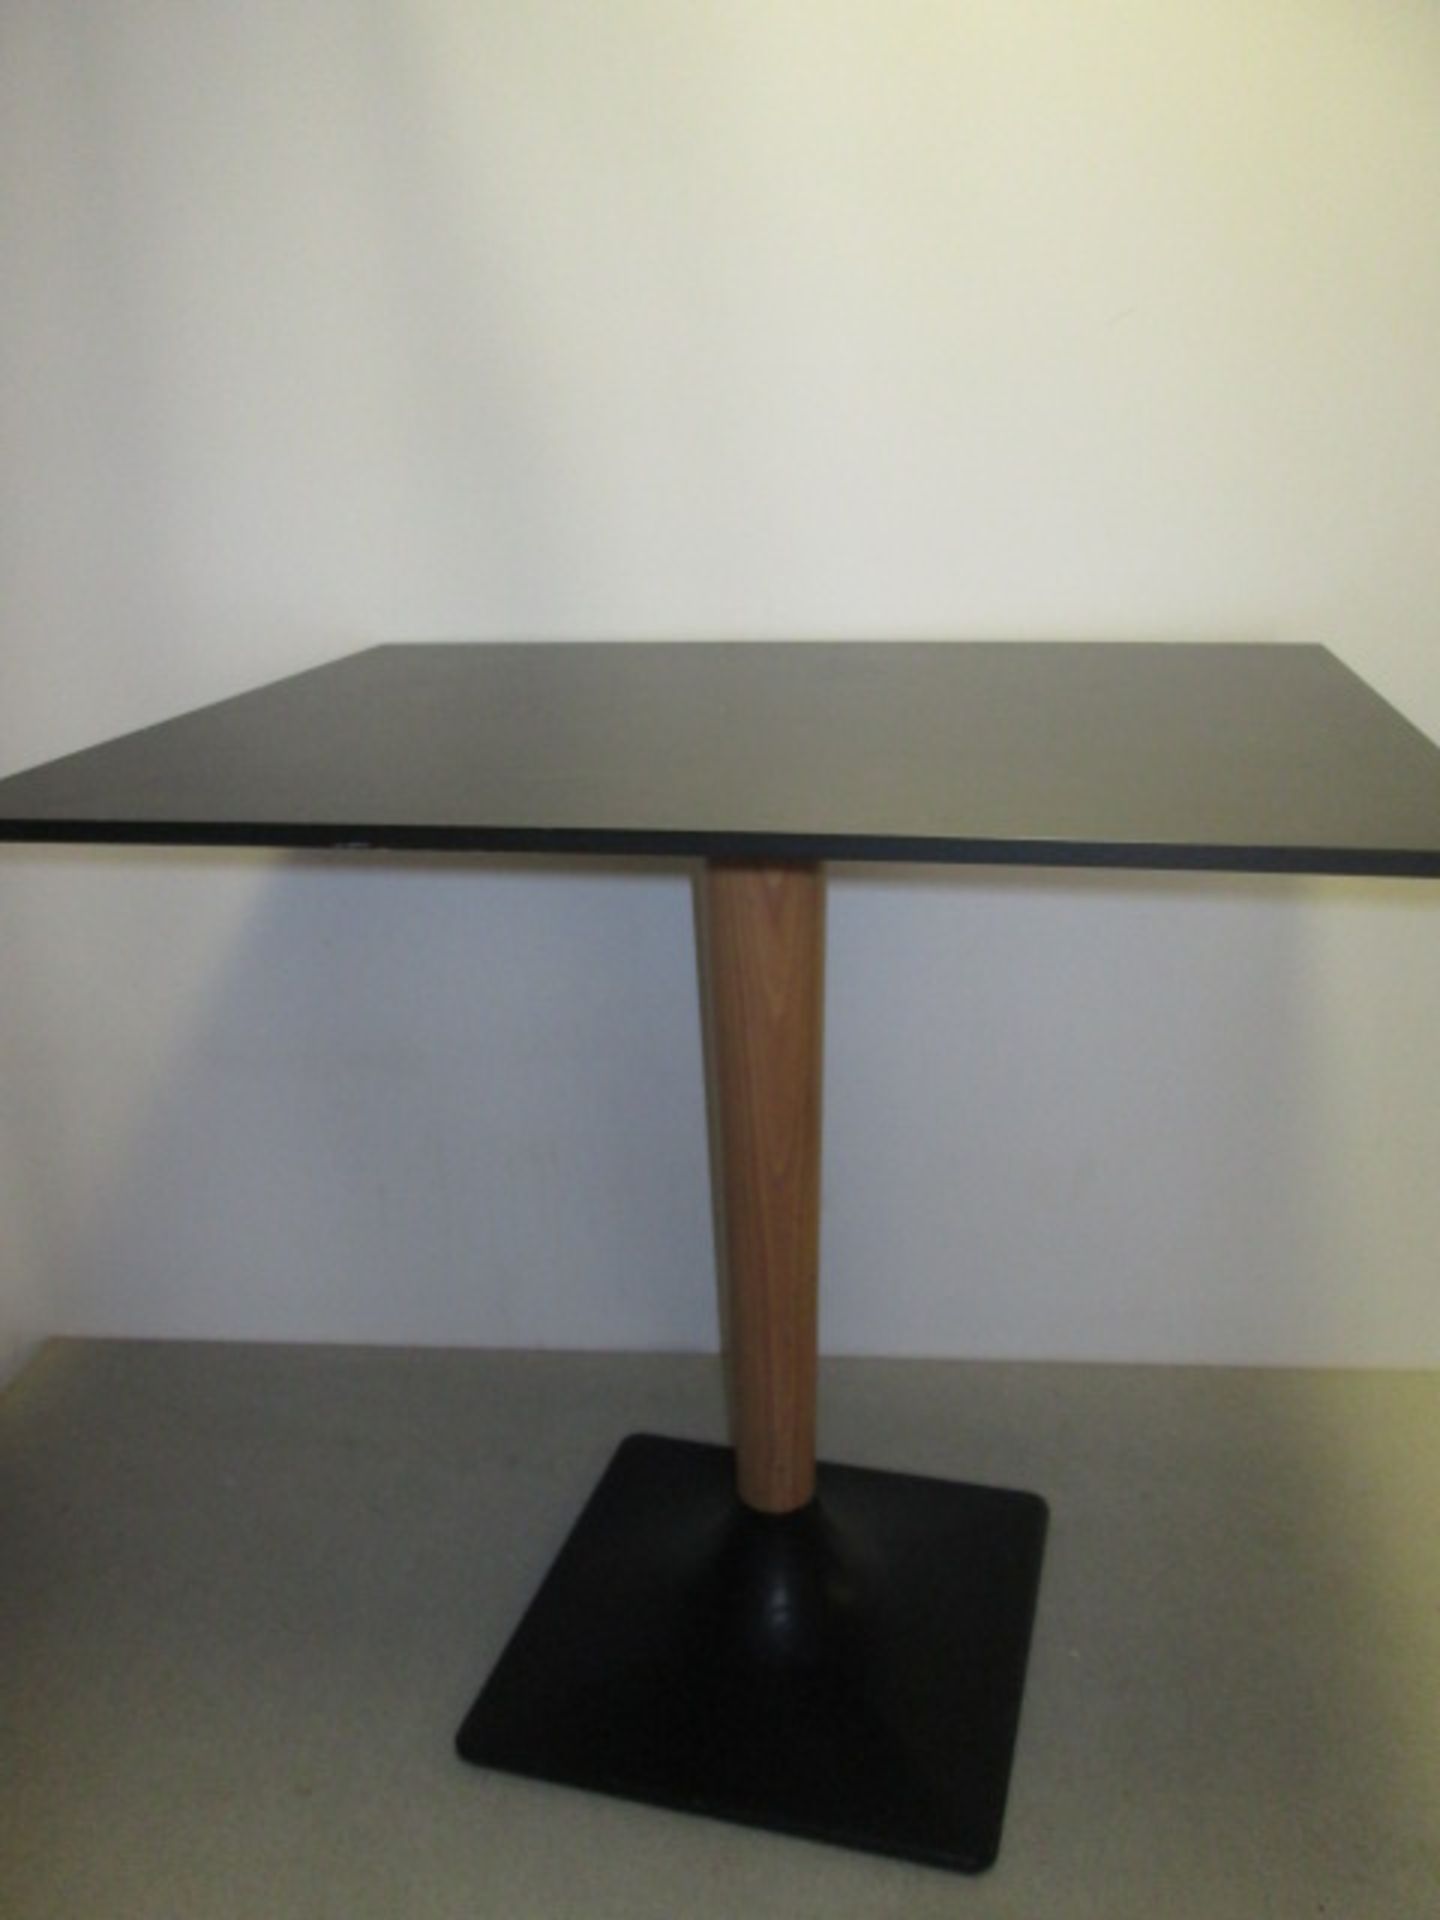 1 x Pedrali Black Laminate Topped Restaurant Table on Wooden Support & Cast Iron Base, Size 50cm x